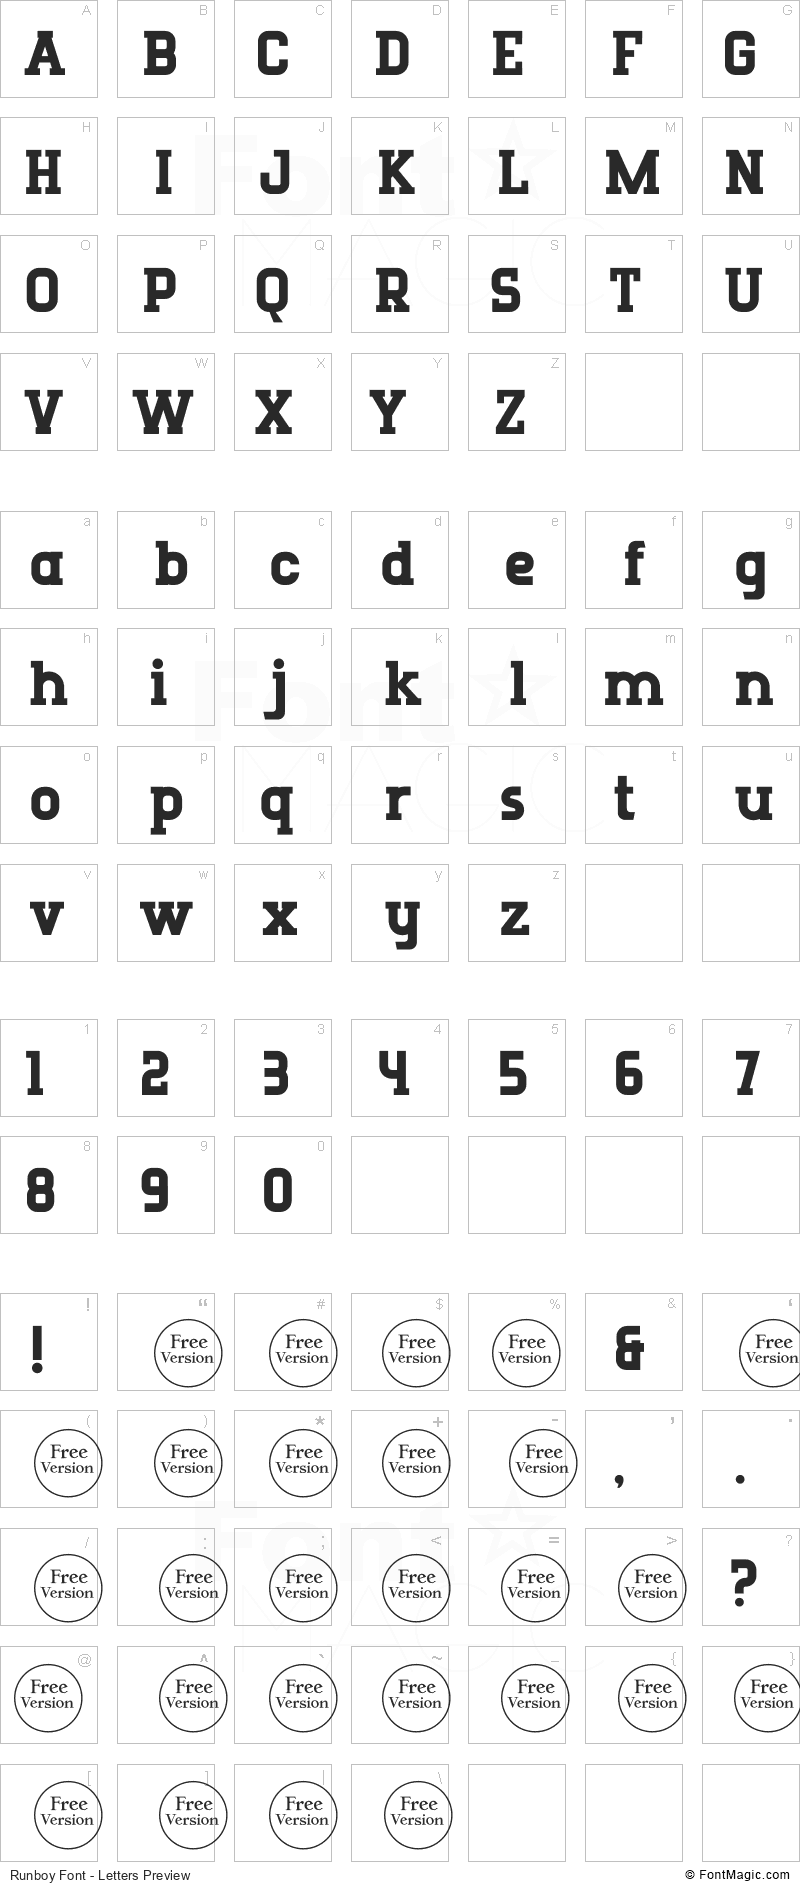 Runboy Font - All Latters Preview Chart